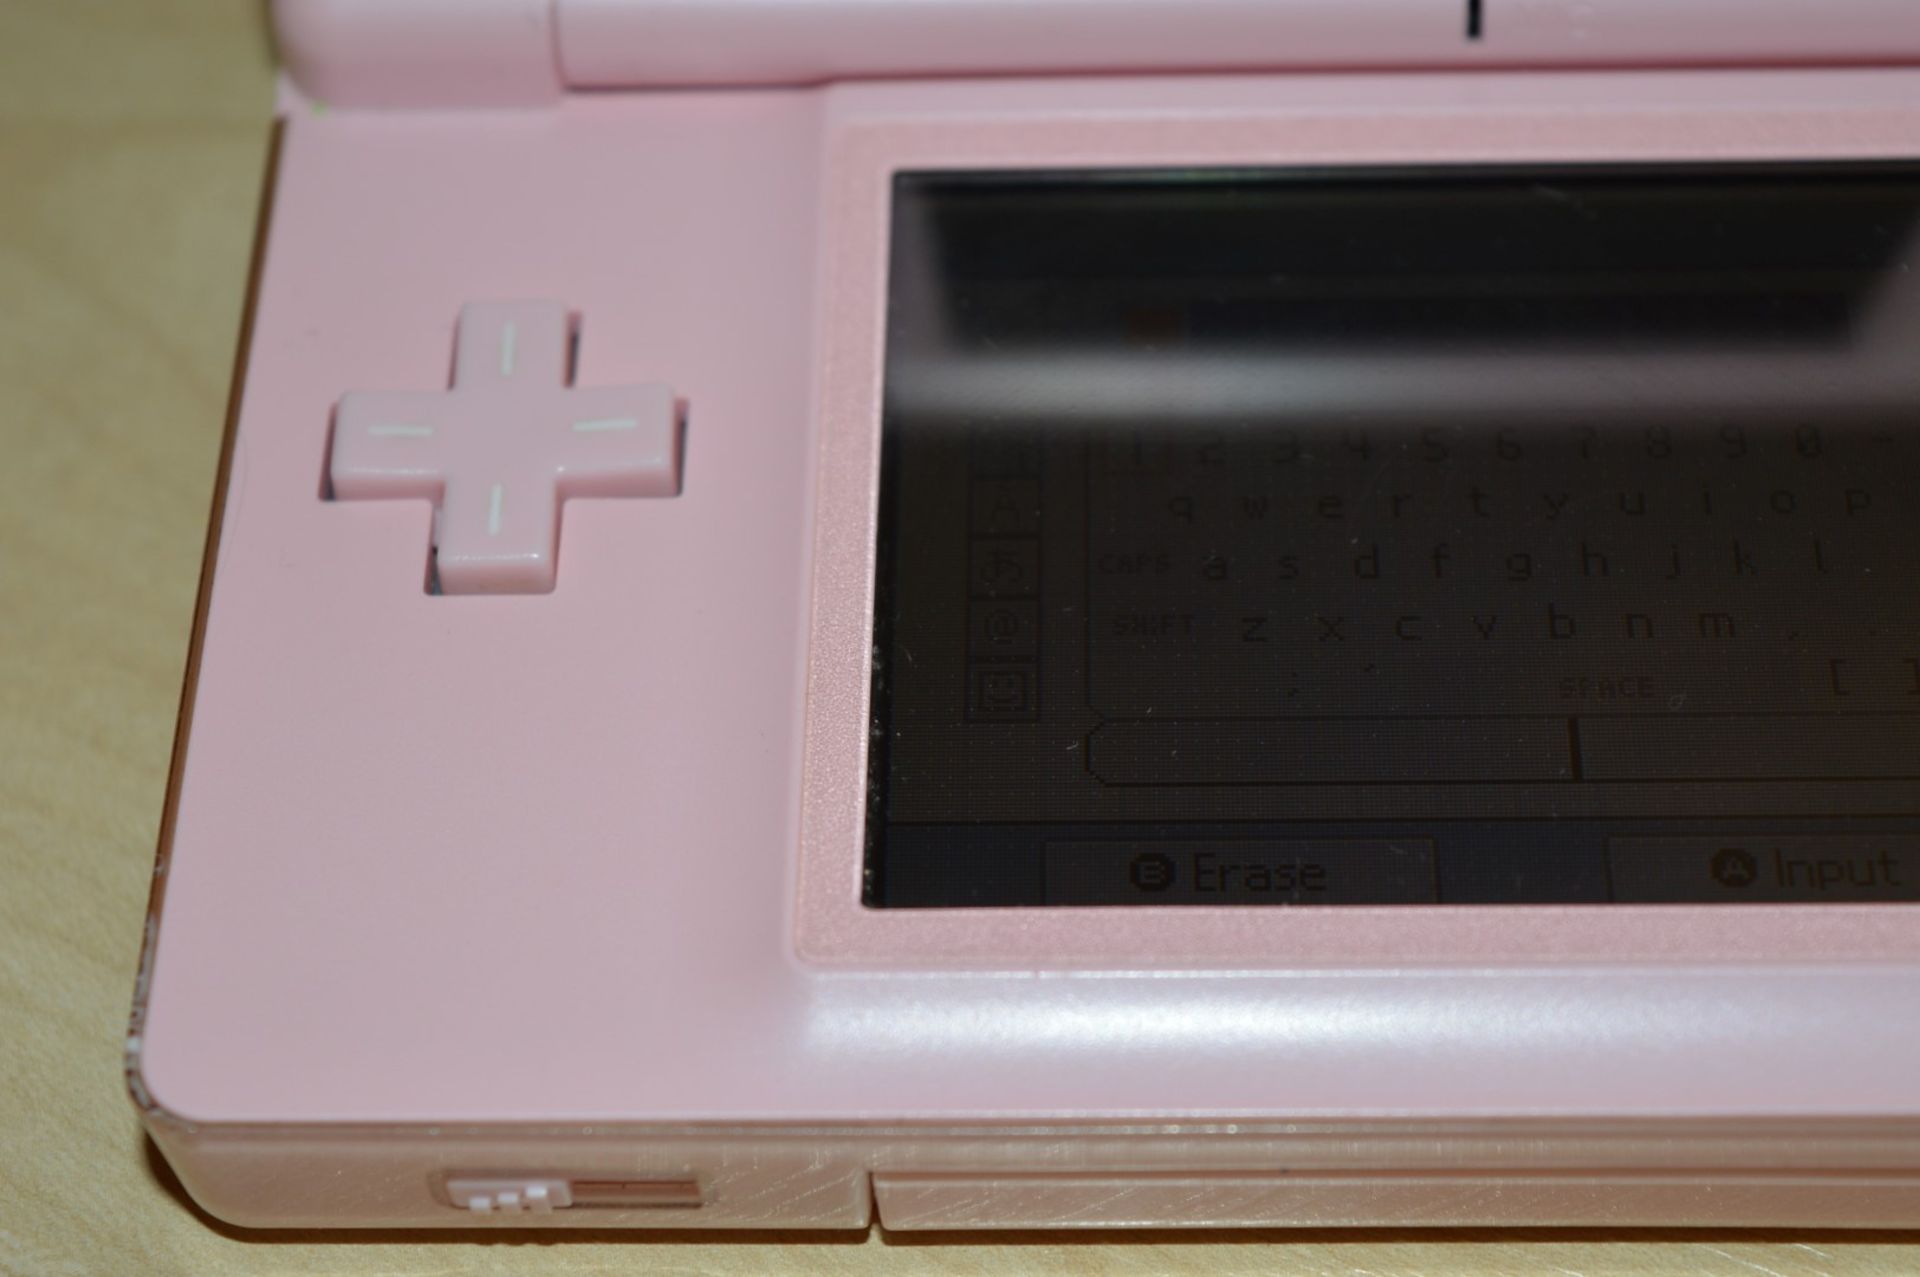 1 x Pink Nintendo DS Lite With High School Musical 2 Game - Includes Touch Pen and Charger - Good - Image 4 of 8